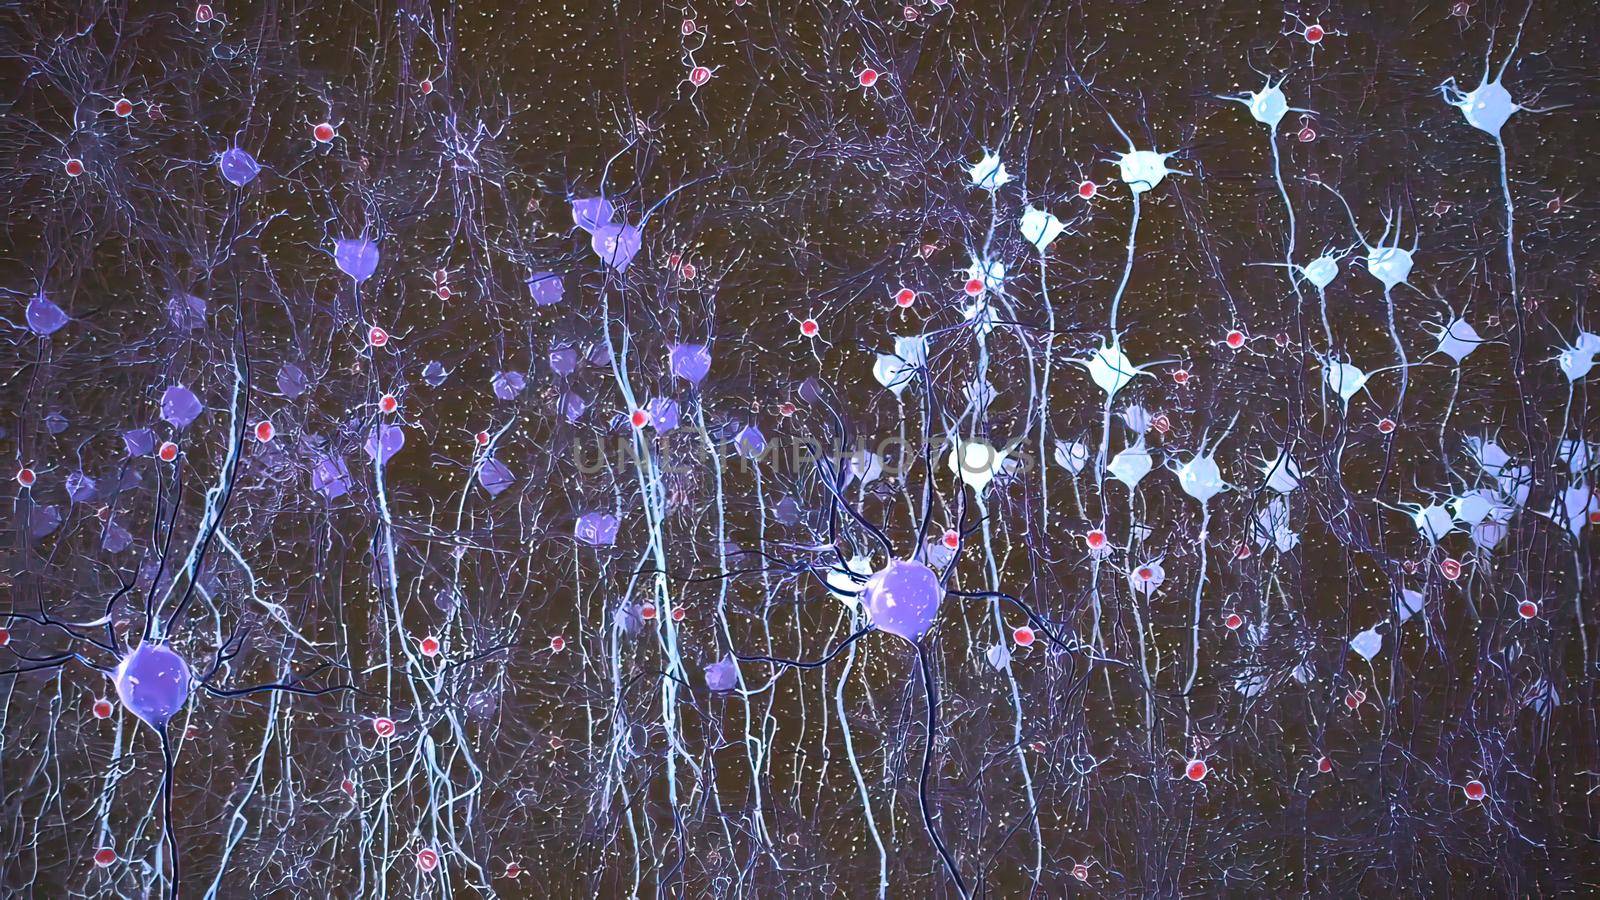 Neurons in action. electrical impulses between neuronal connections by creativepic